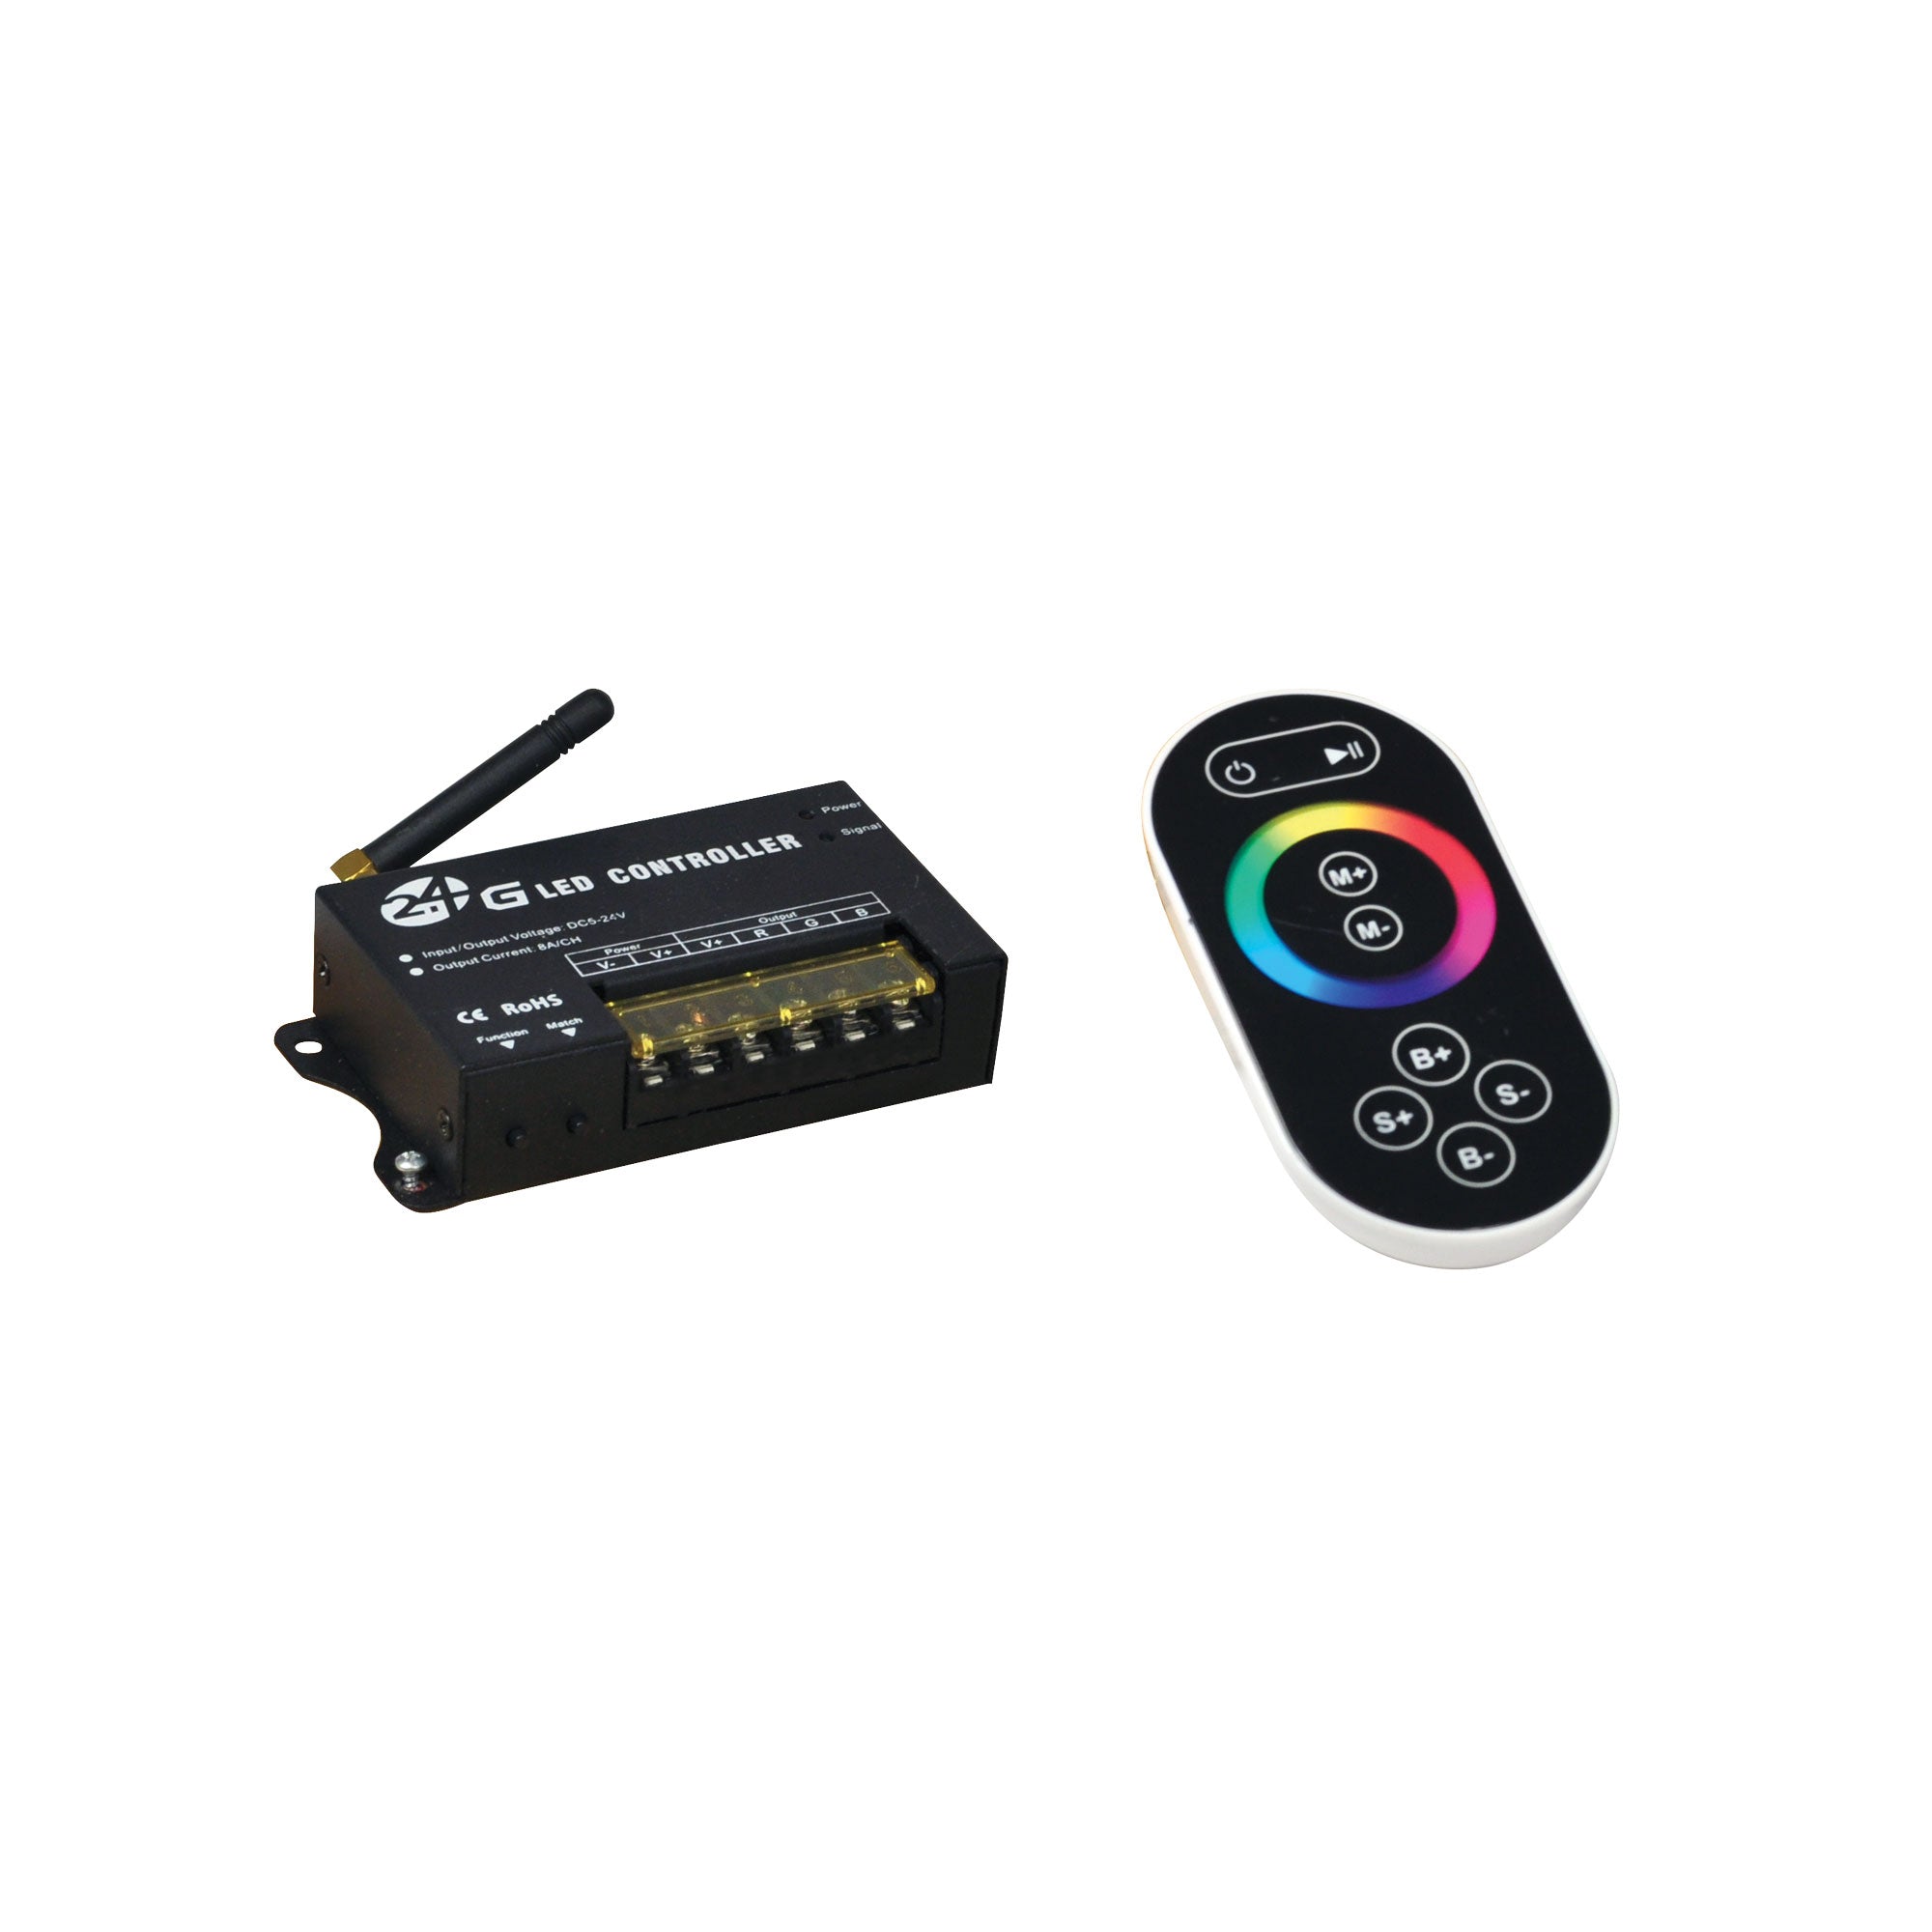 Nora Lighting NARGB-860/61 RGB 2.4 Full Color RF (Radio Frequency) Controller & Hand Held Remote - Black